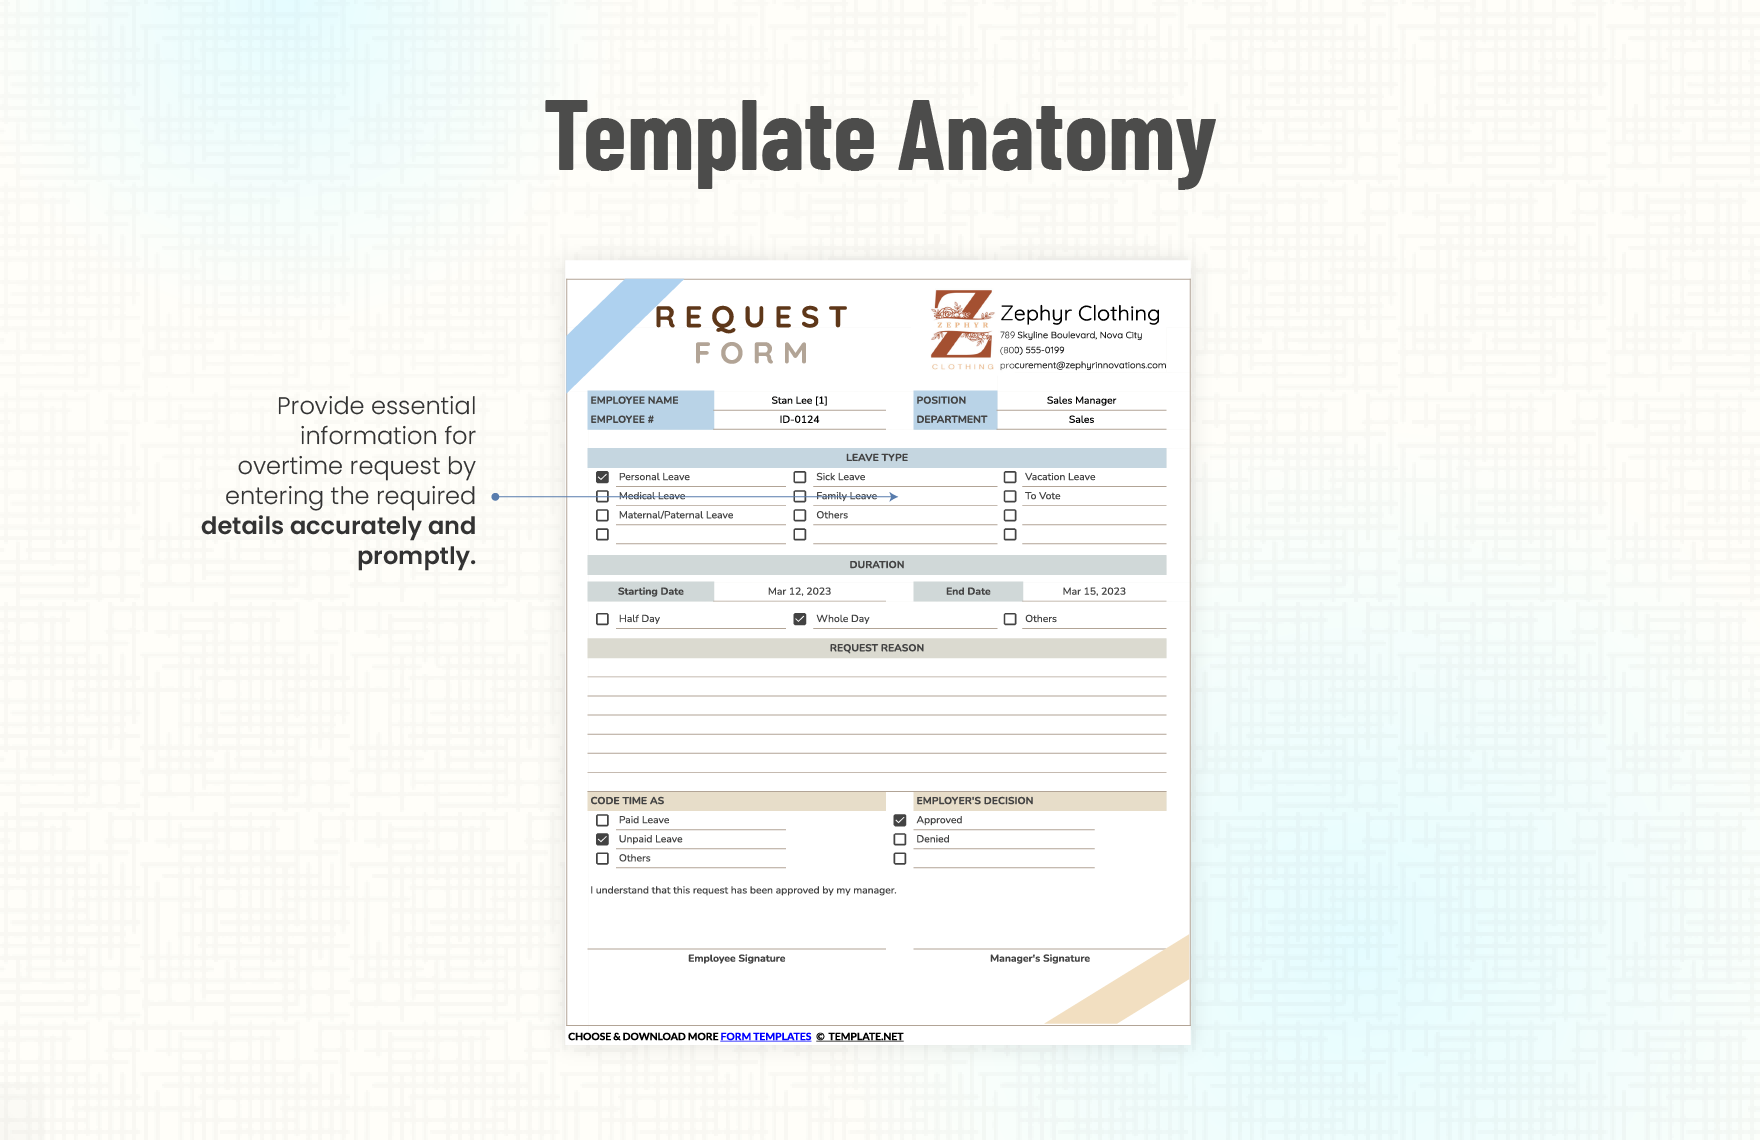 Sample Request Form Template